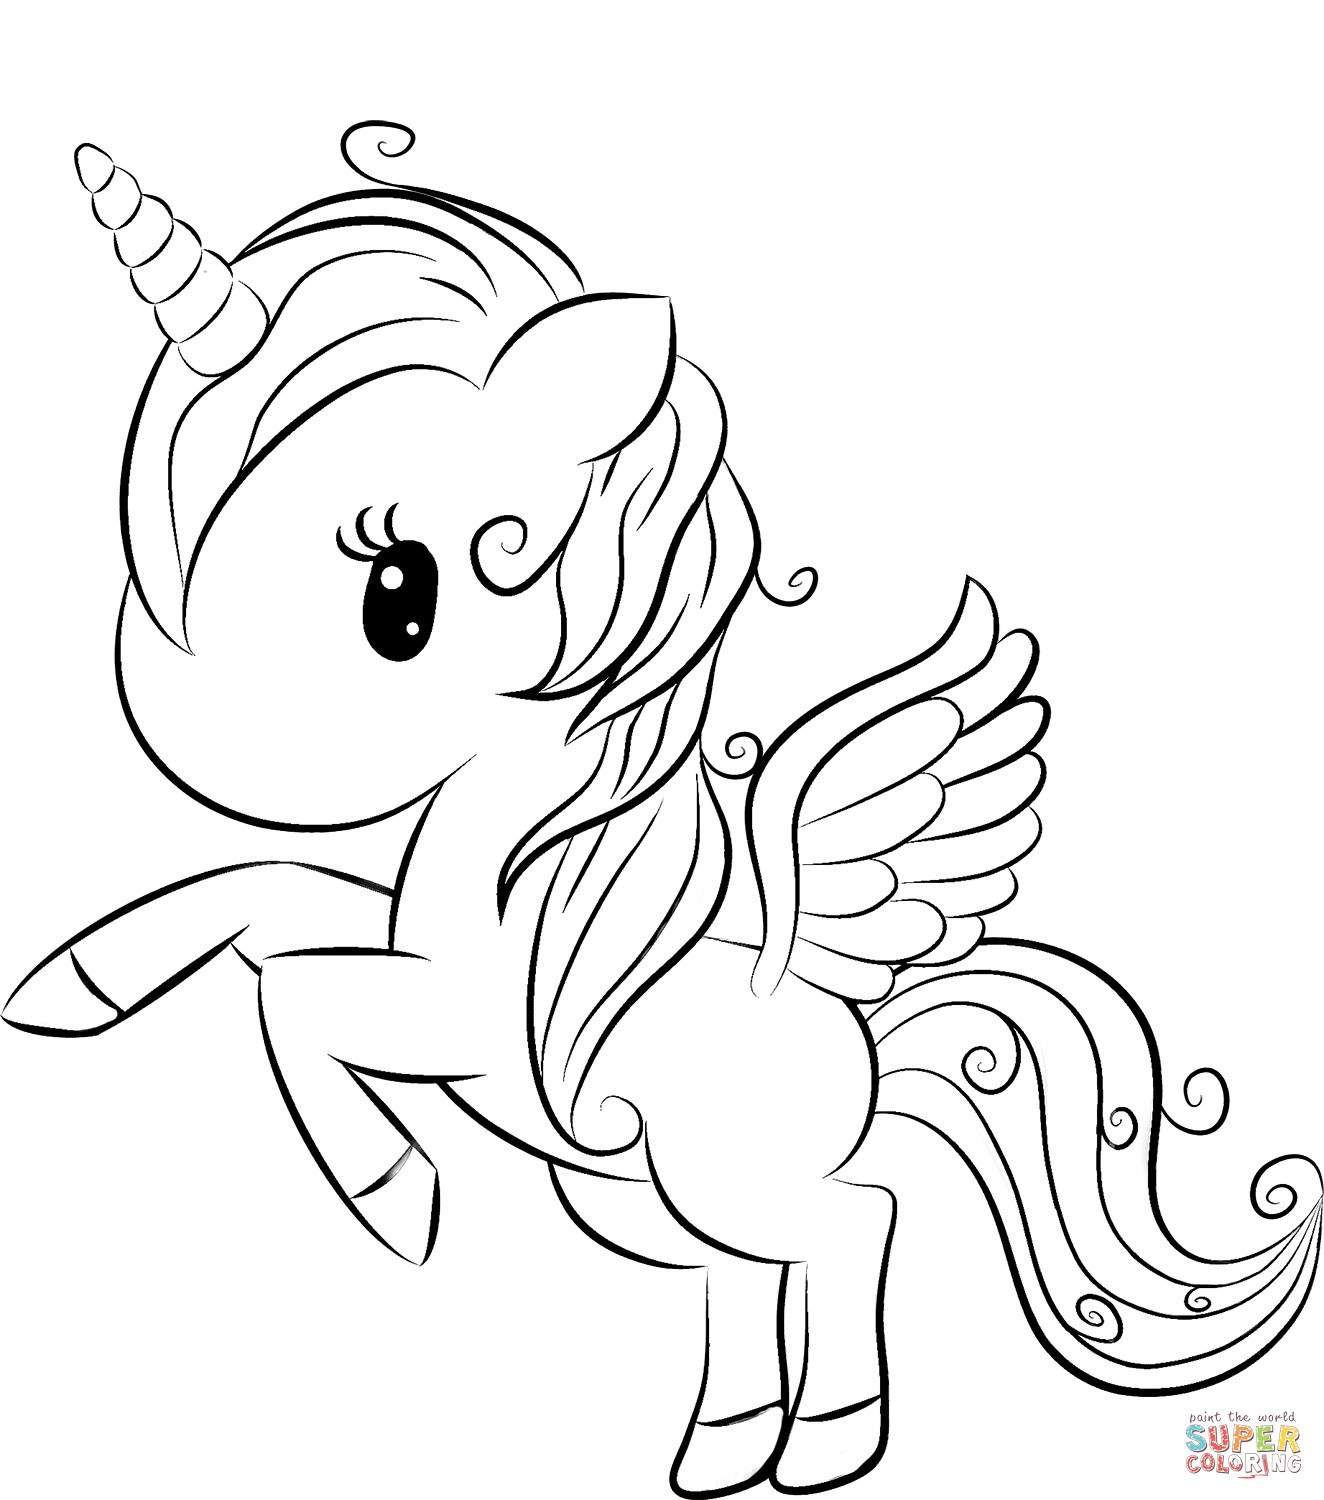 Free Printable Coloring Pages Of Unicorns
 Cute Unicorn coloring page